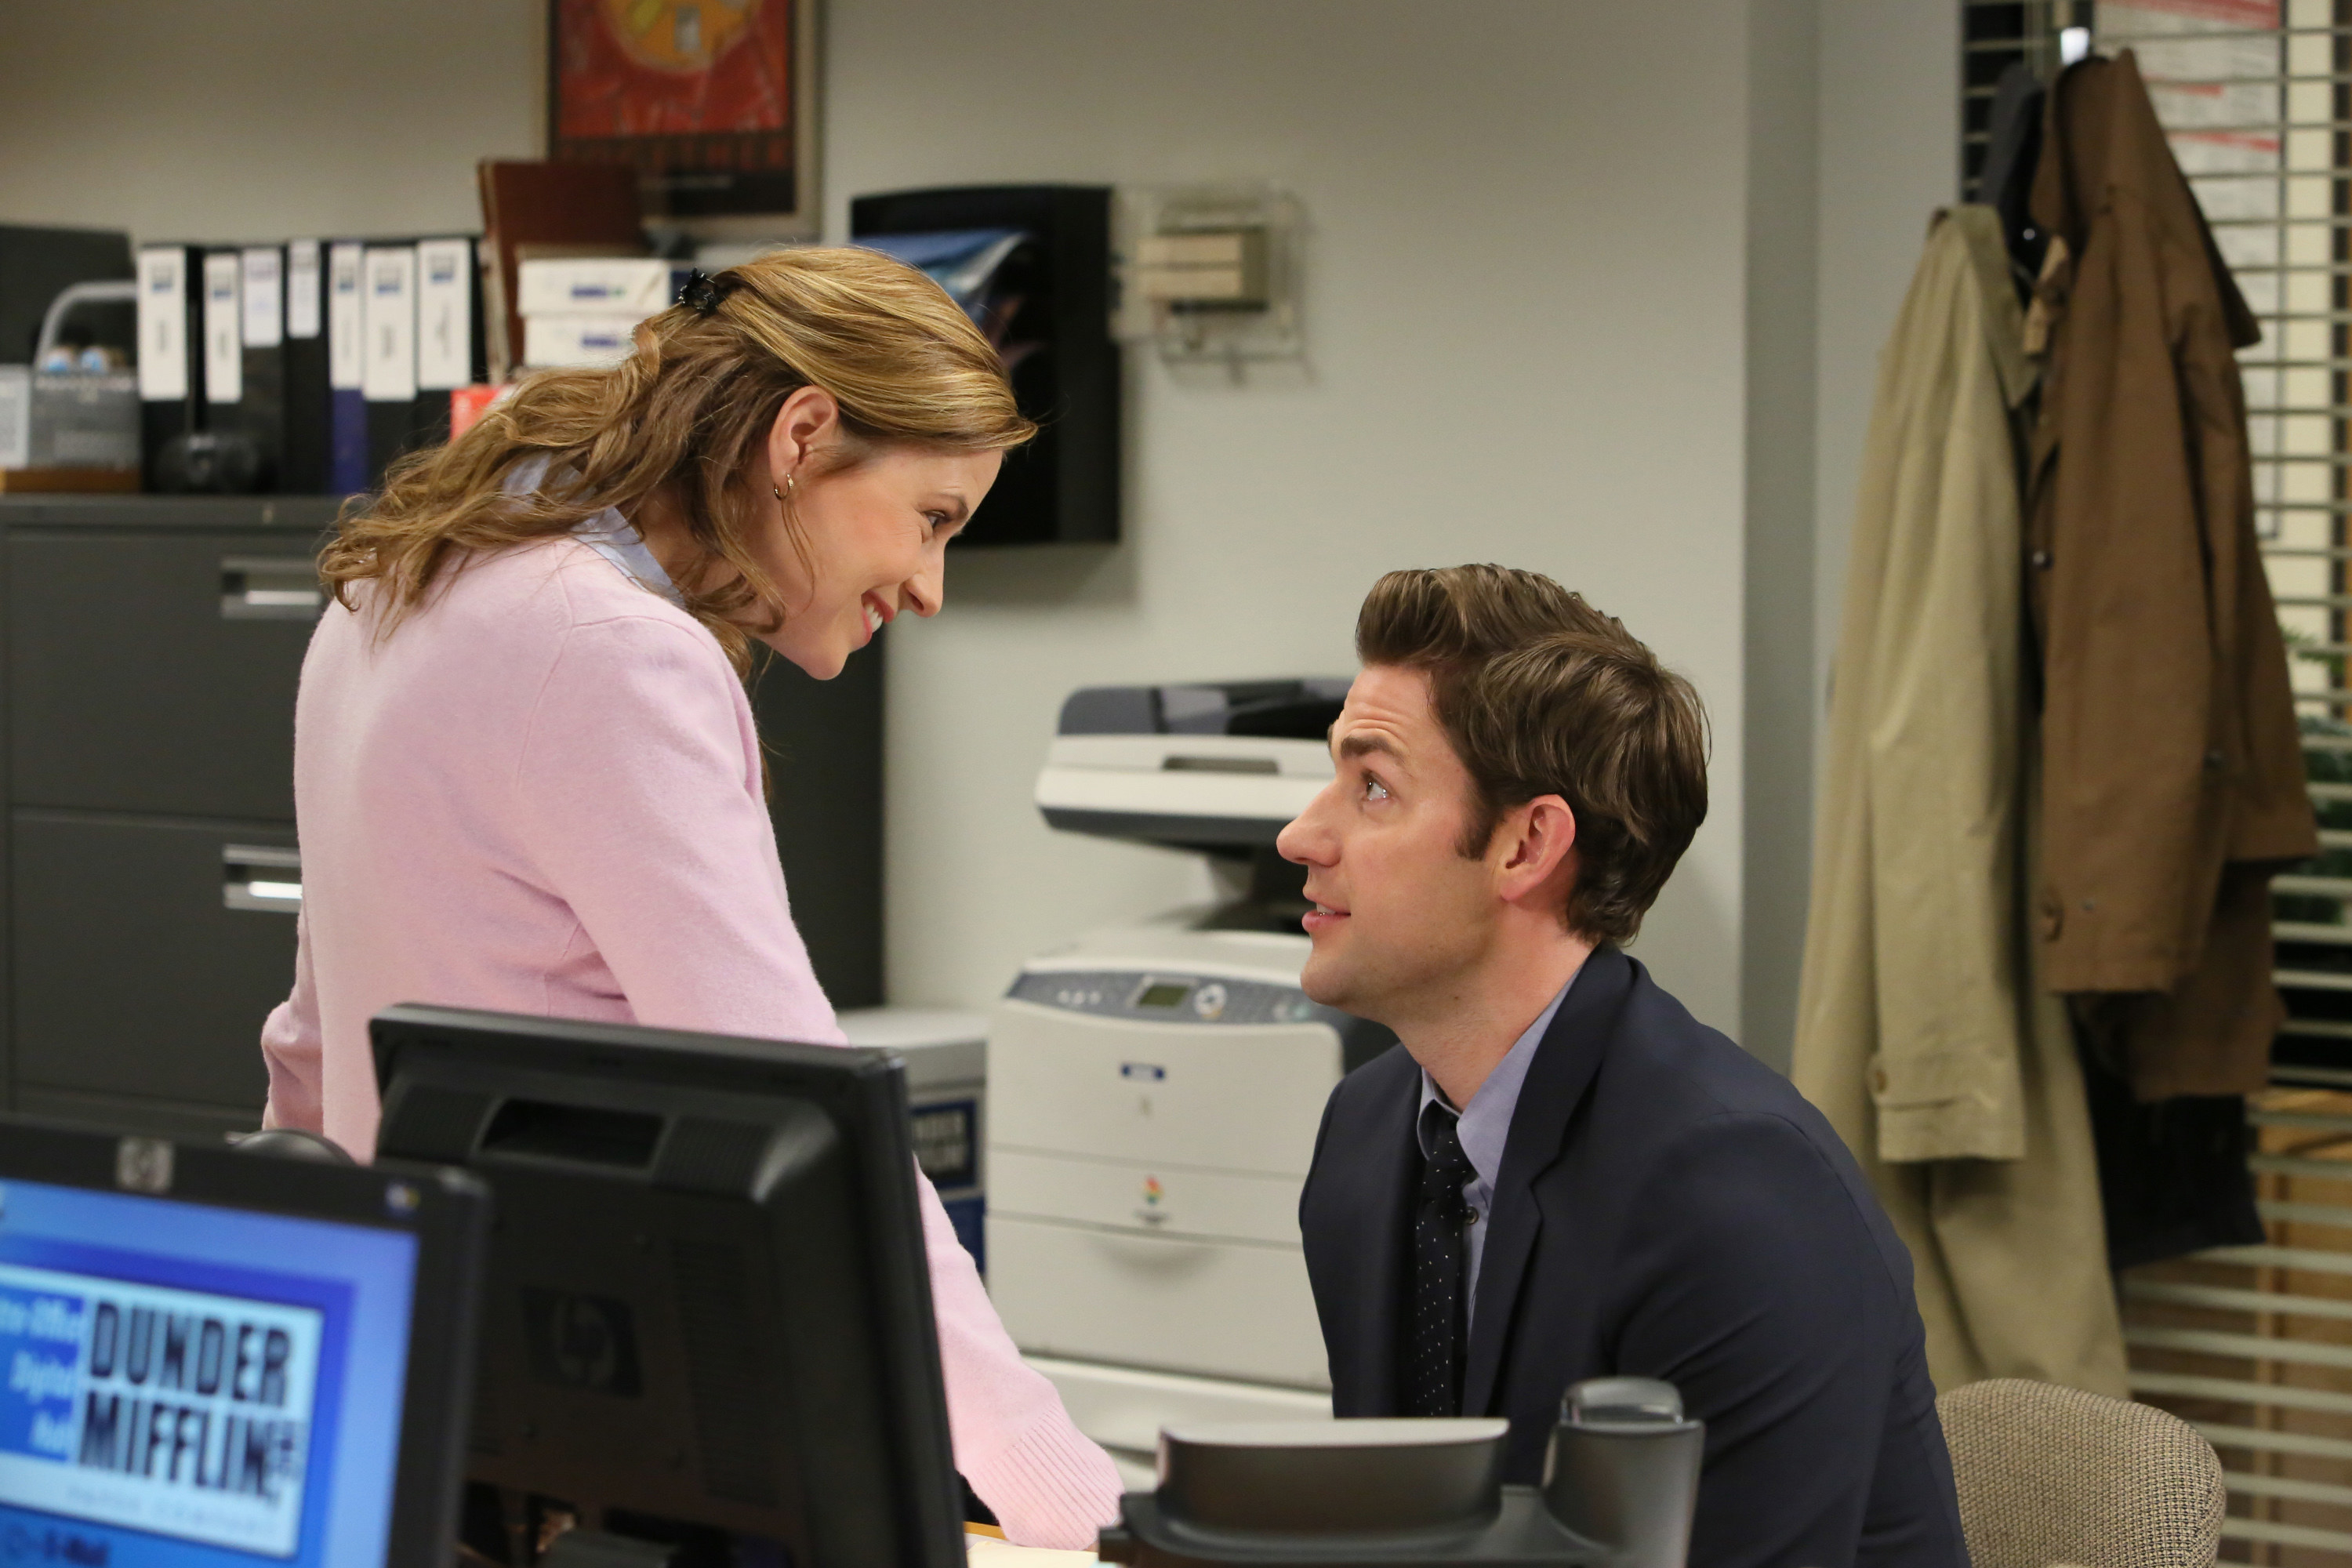 Jim and Pam talking in the office